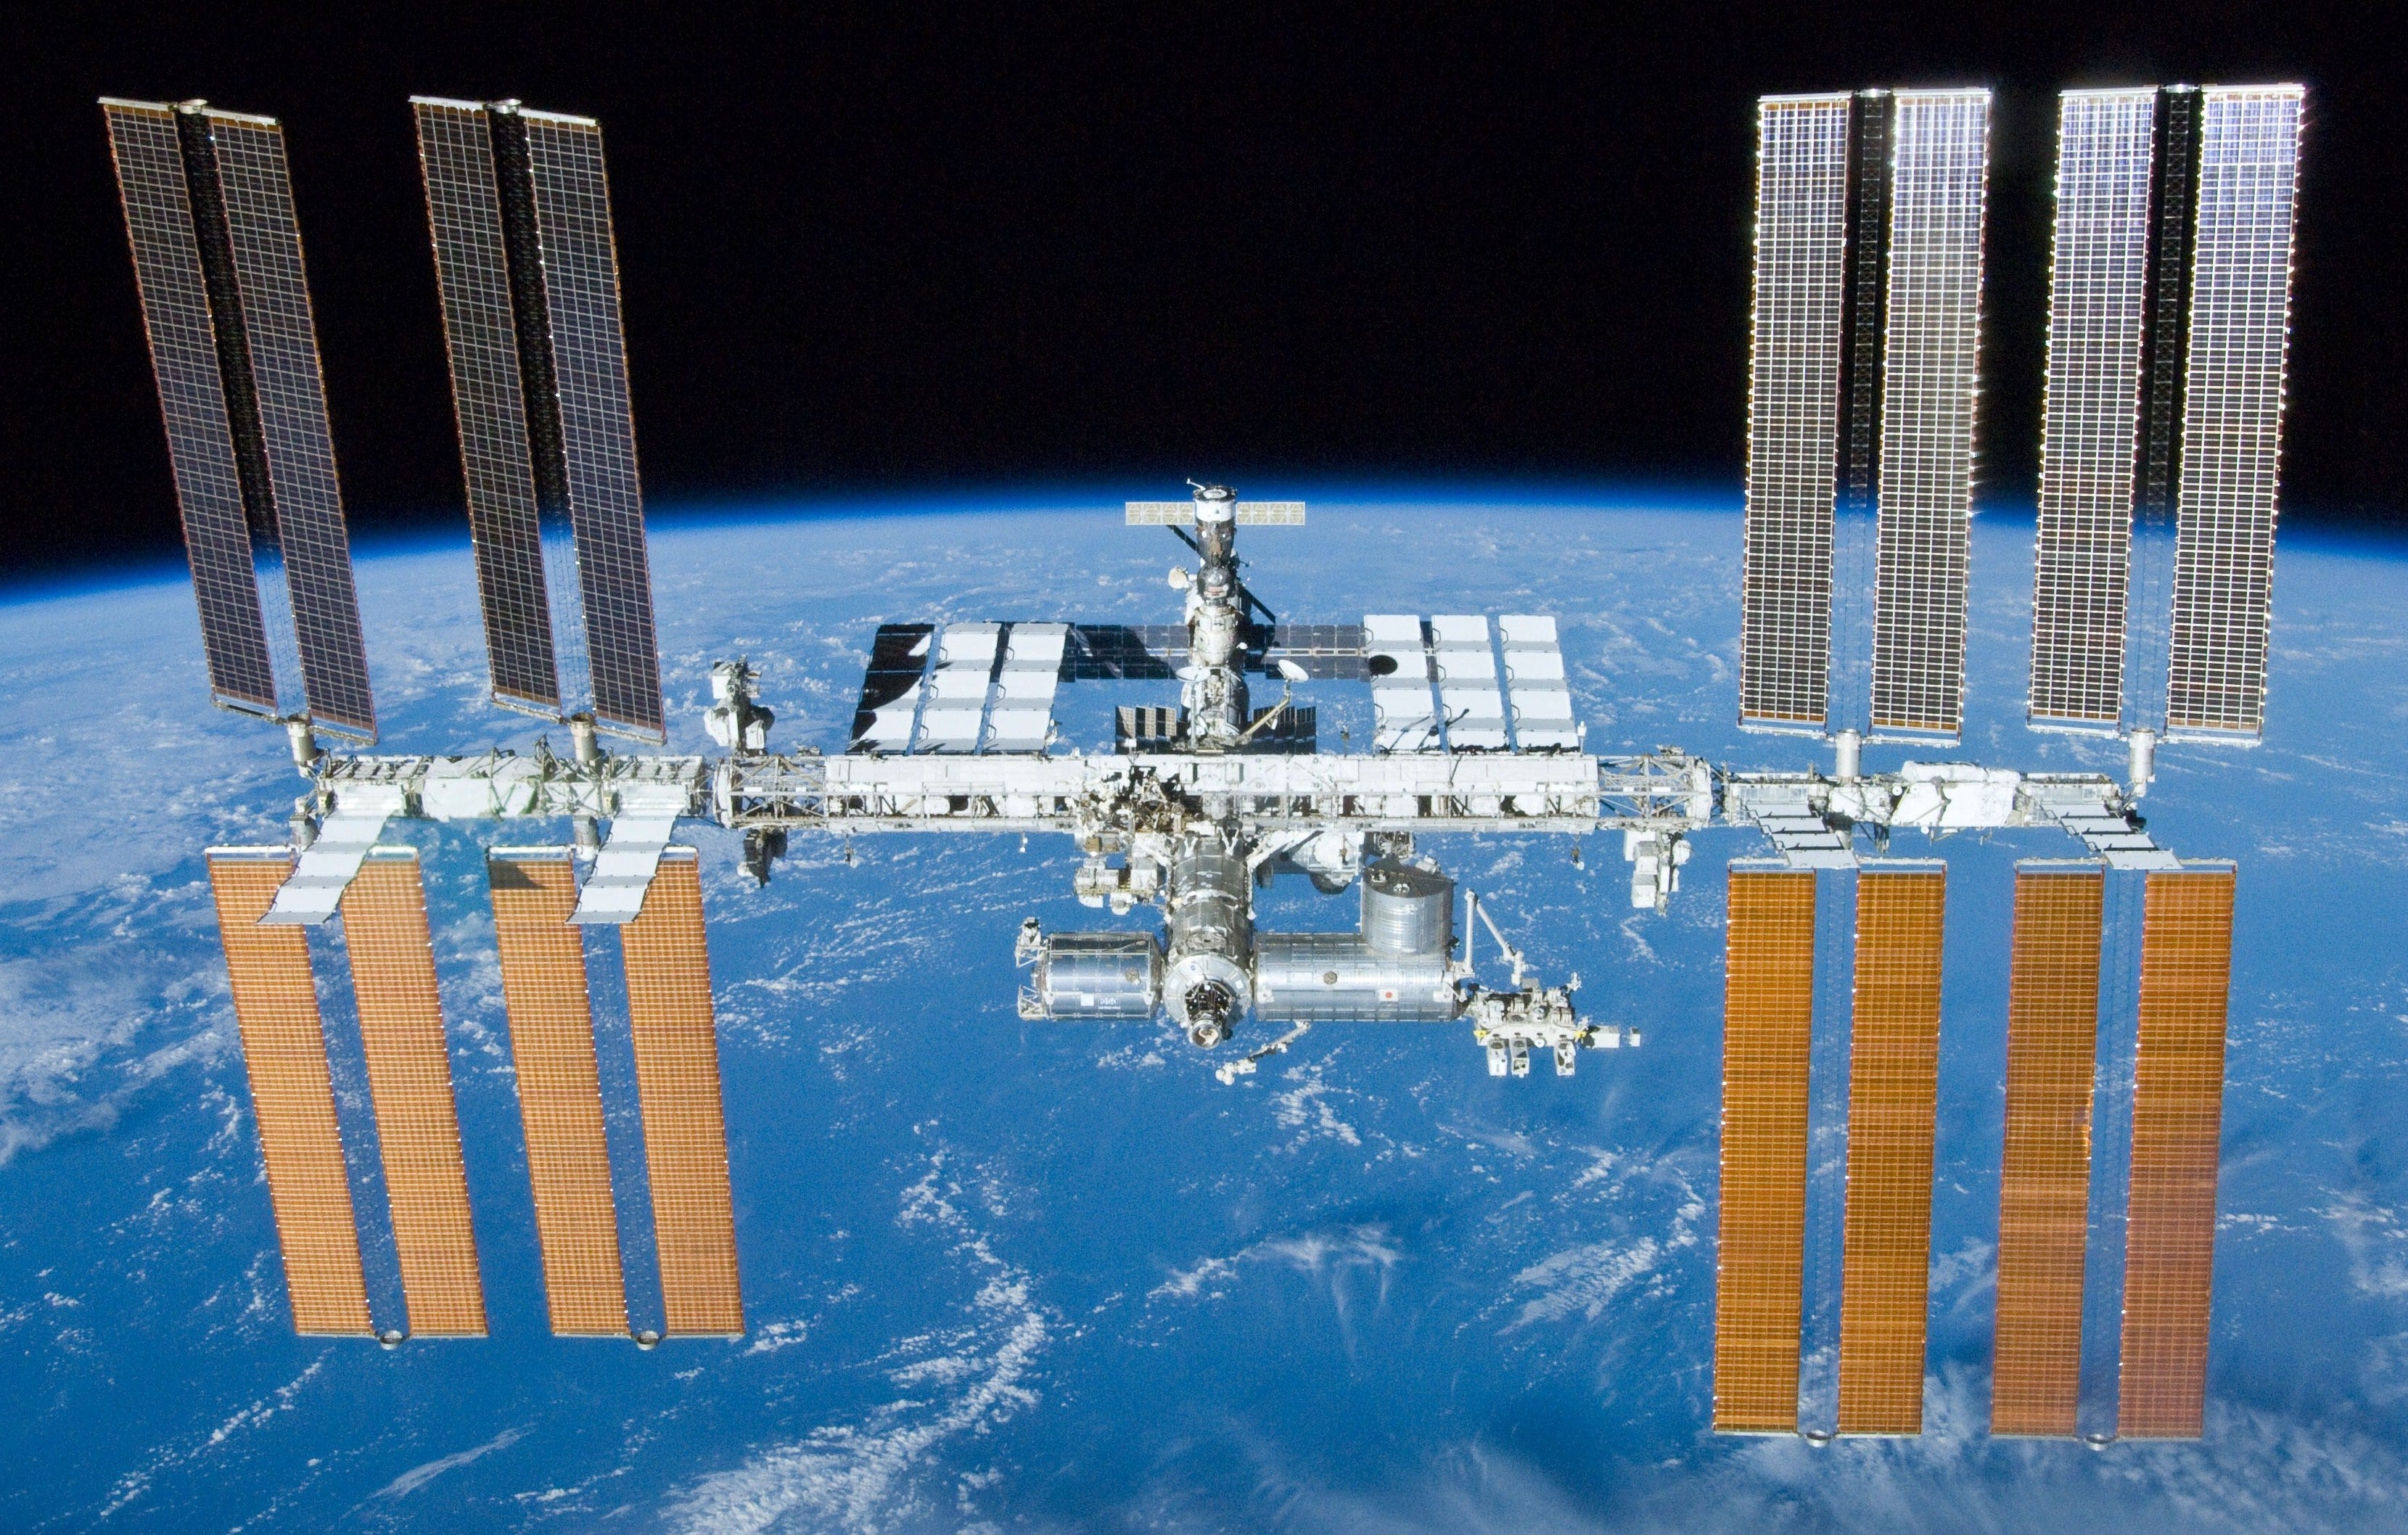 international space station interactive